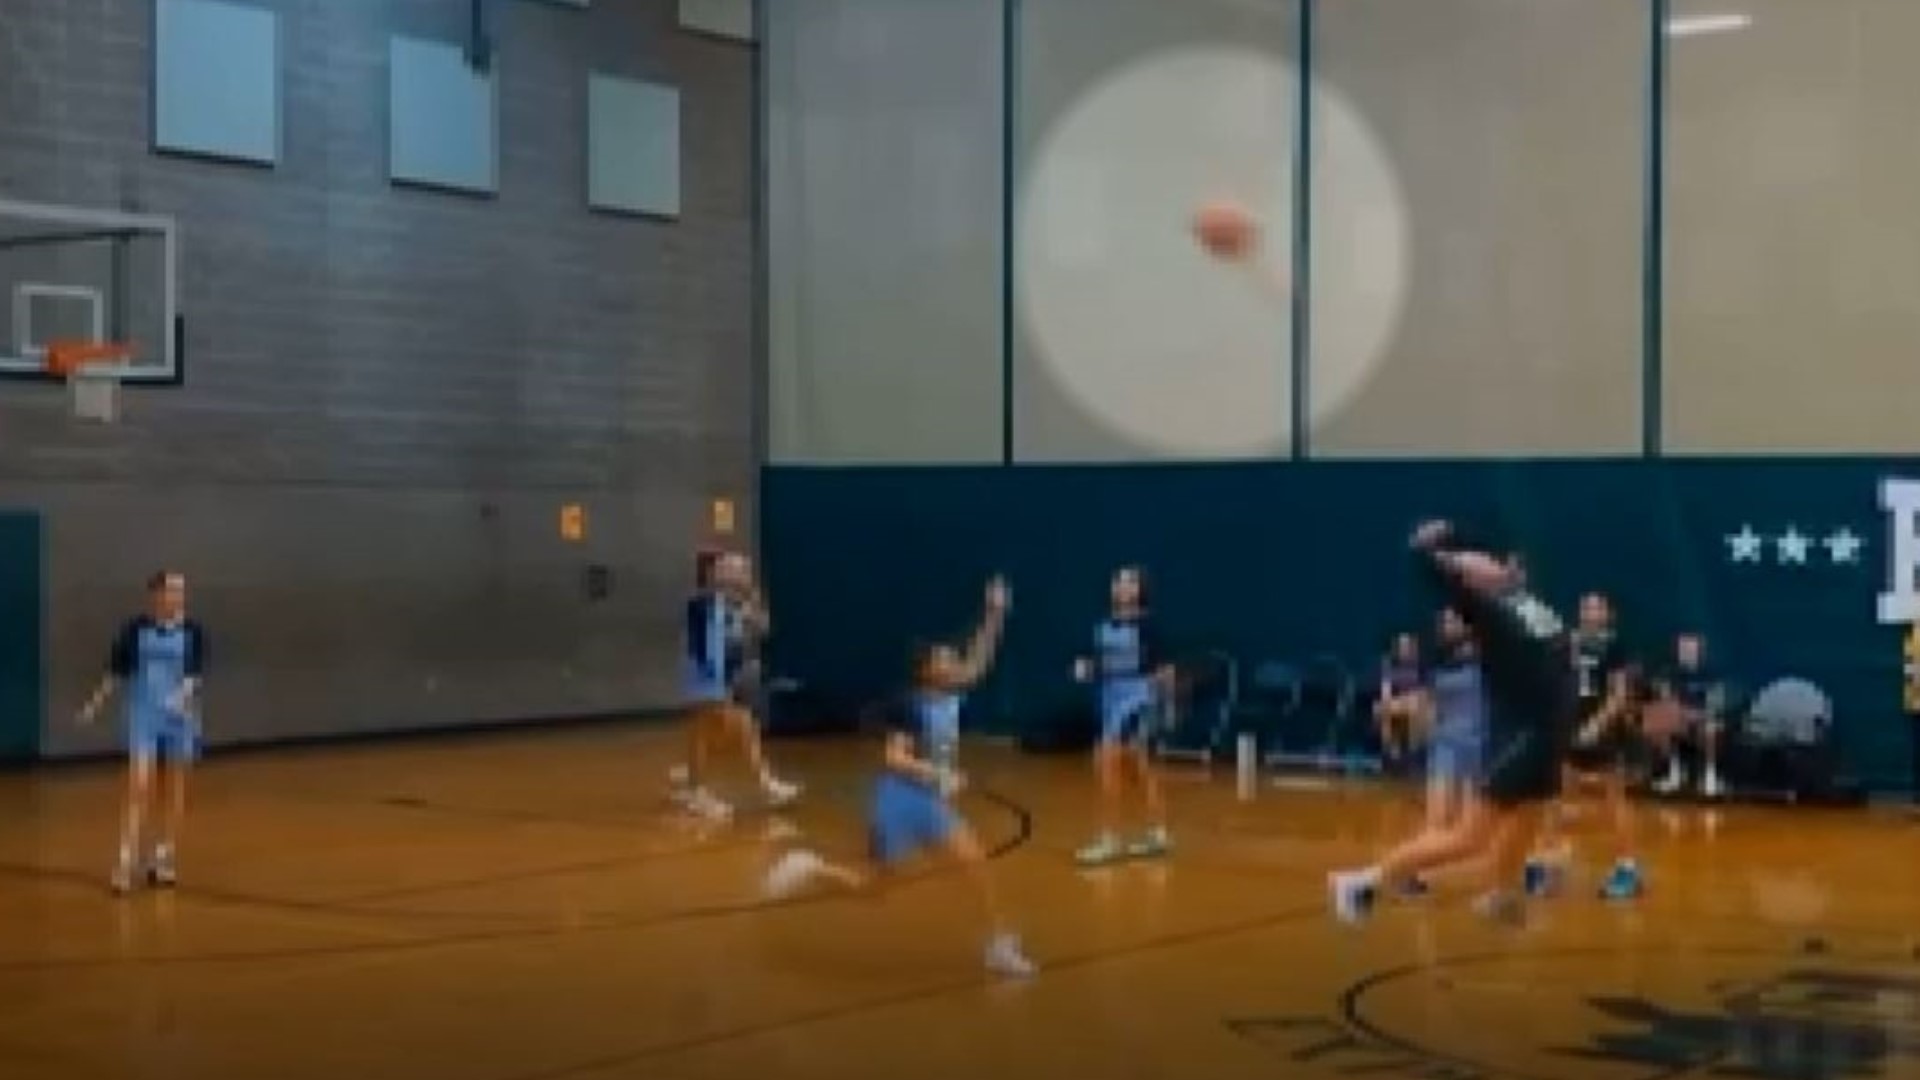 Audrey Jackson hits backwards shot from halfcourt just after the buzzer at Thomas Jefferson Middle School in Vancouver, Wash. Video from Tara Jackson.